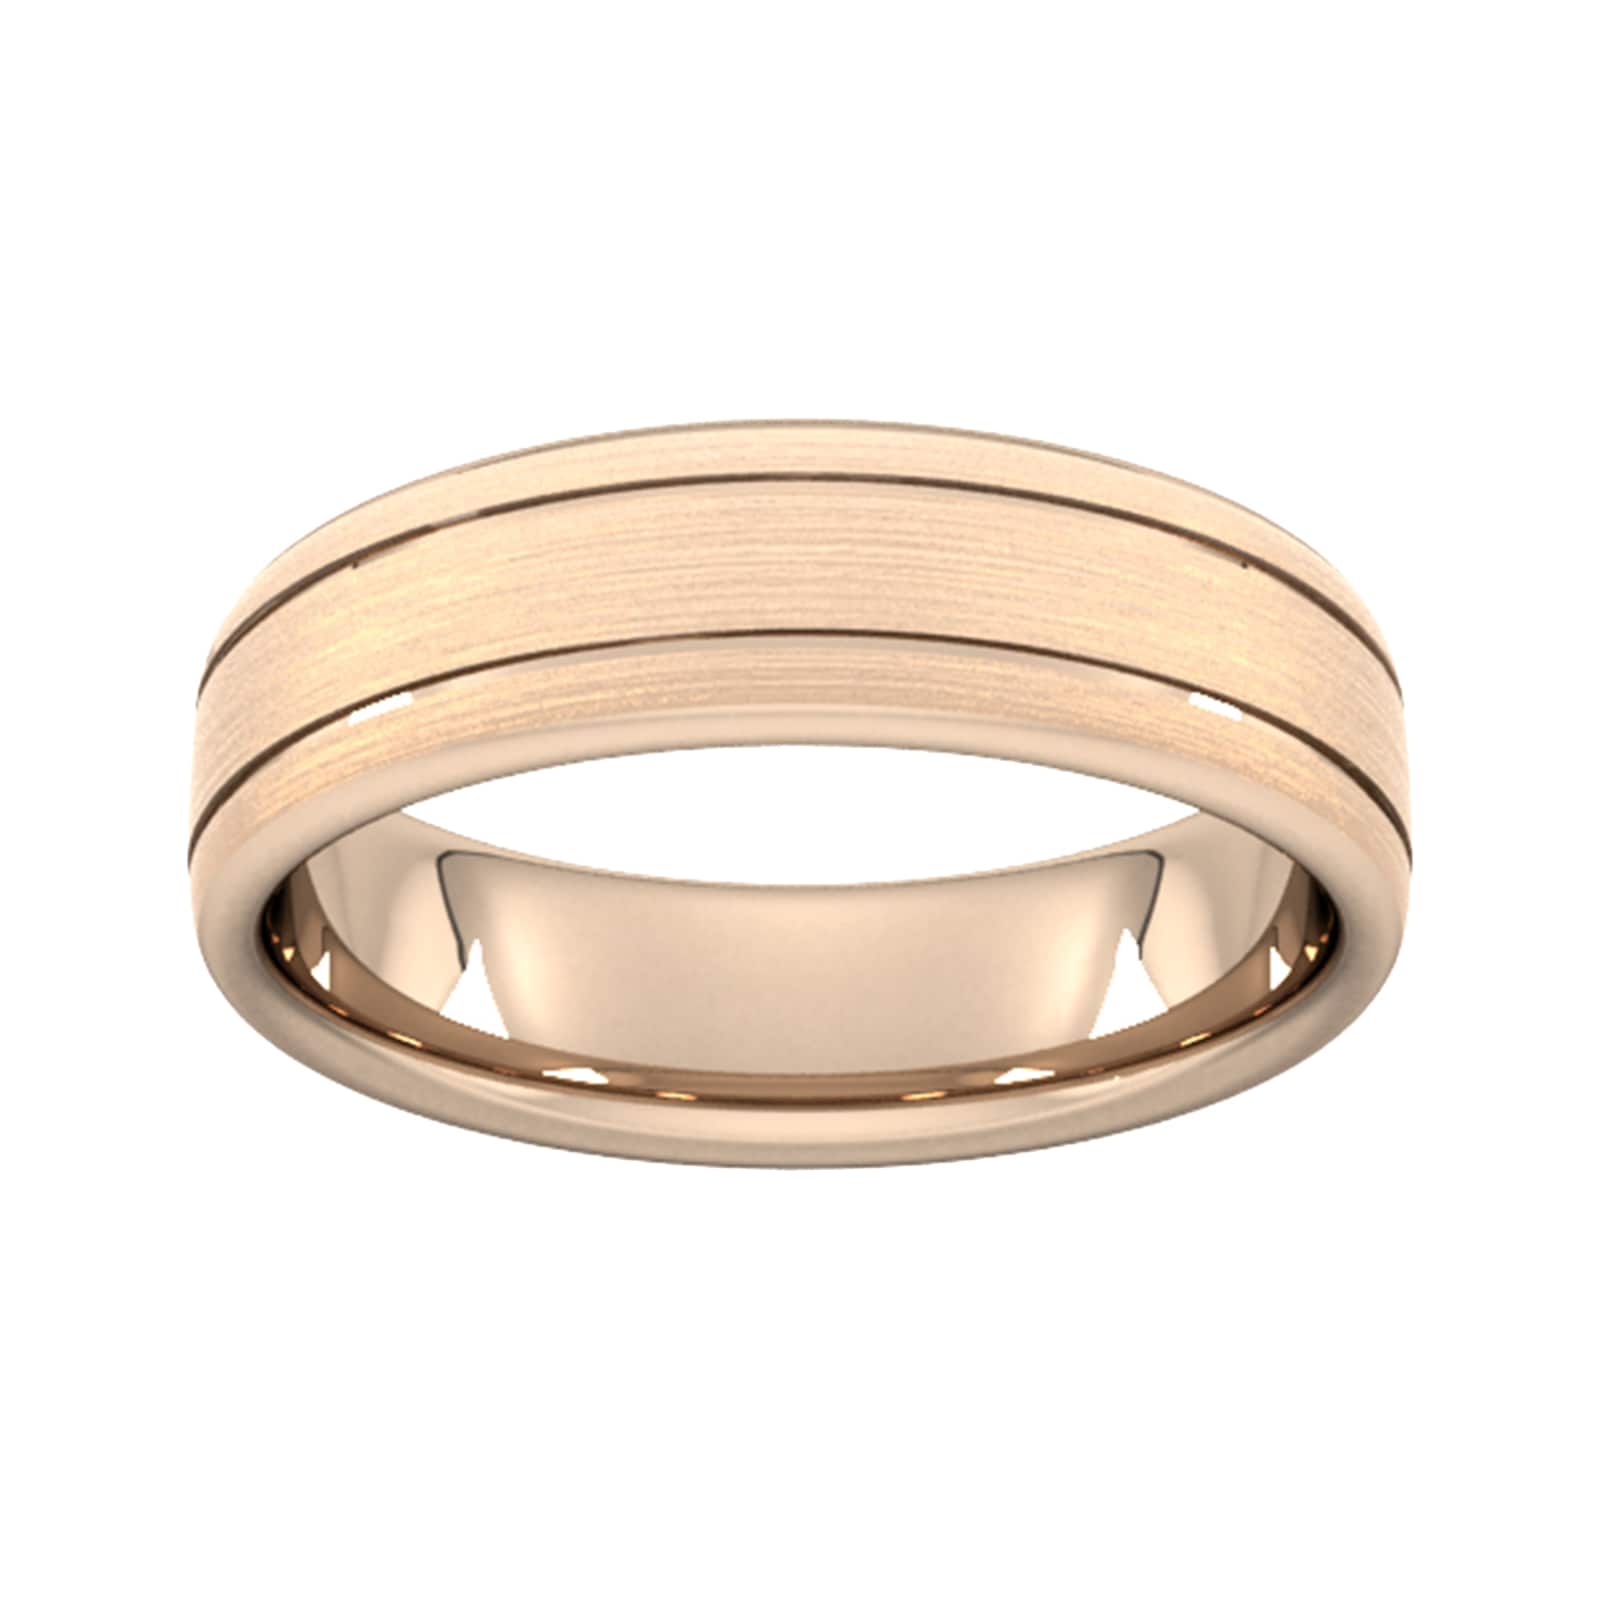 6mm D Shape Heavy Matt Finish With Double Grooves Wedding Ring In 9 Carat Rose Gold - Ring Size P